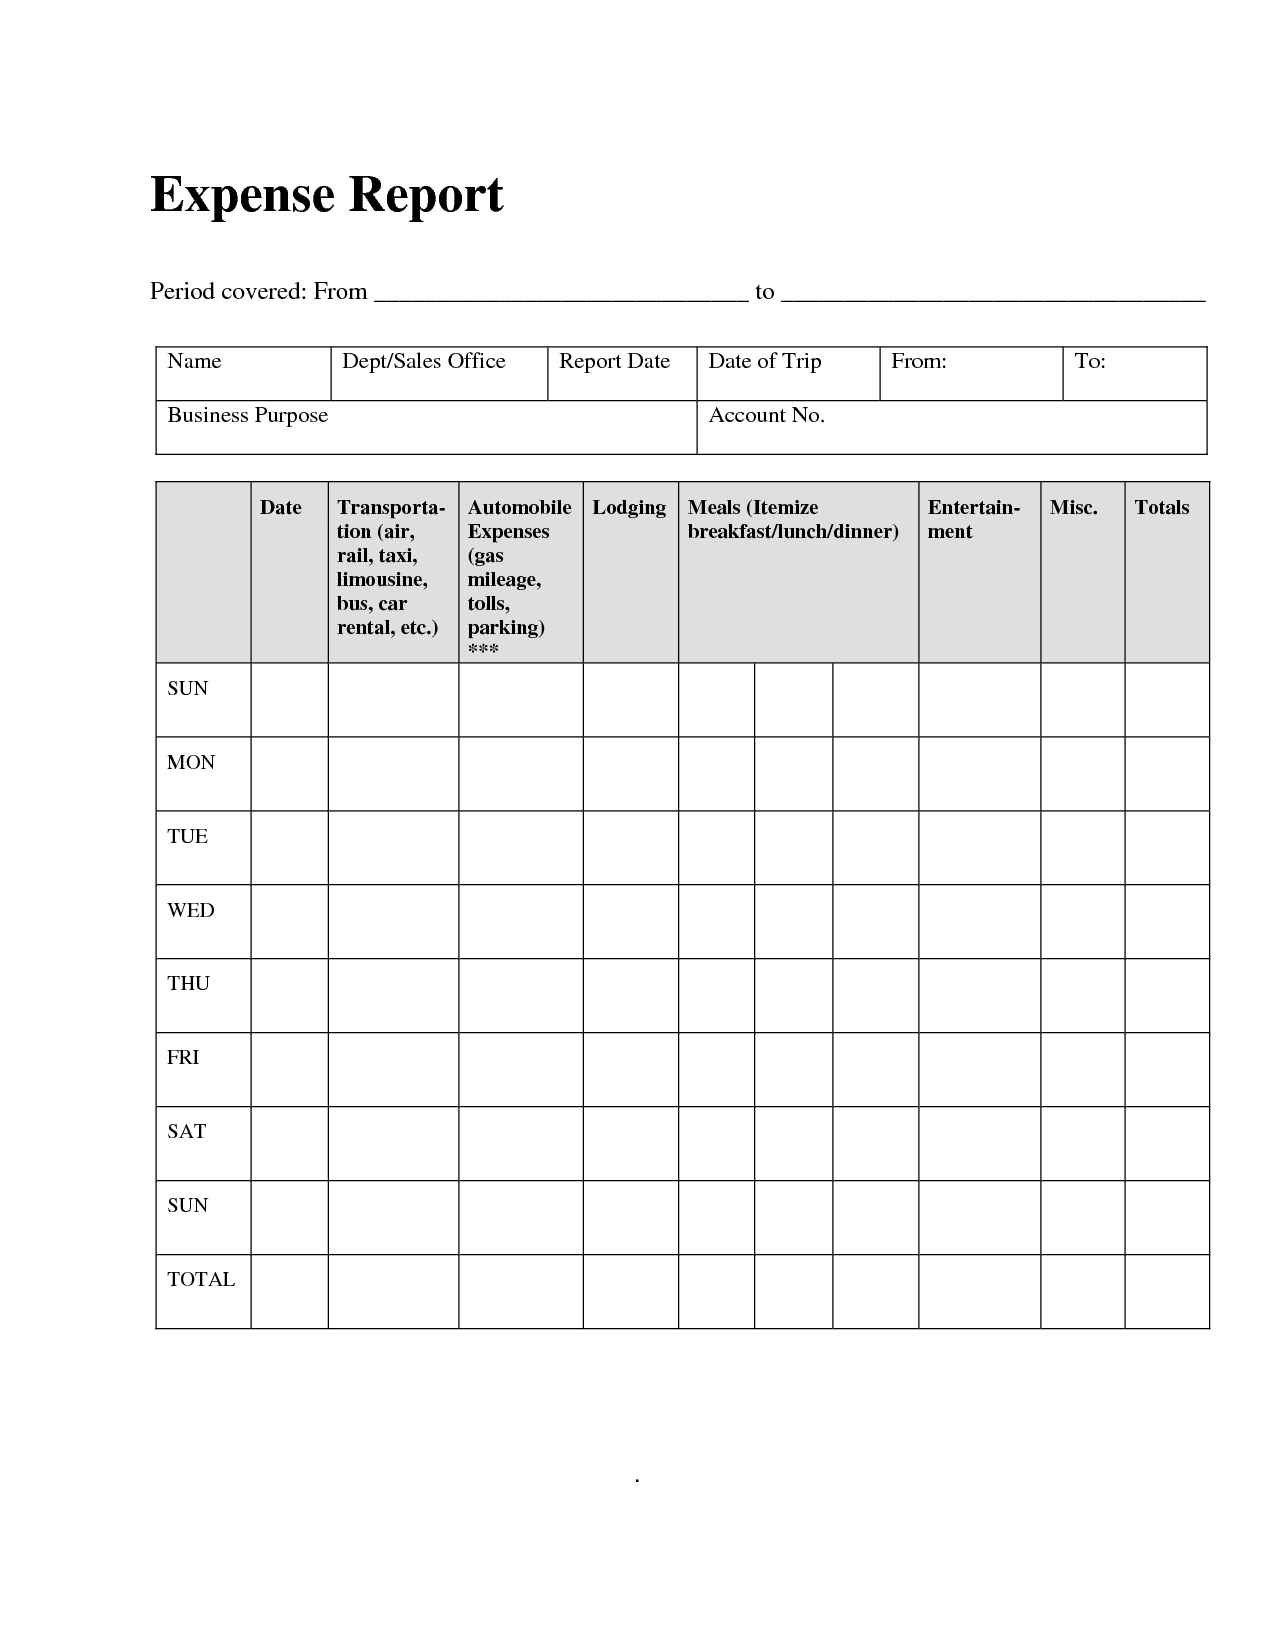 monthly-expense-report-template-excel-free-download-resume-gallery